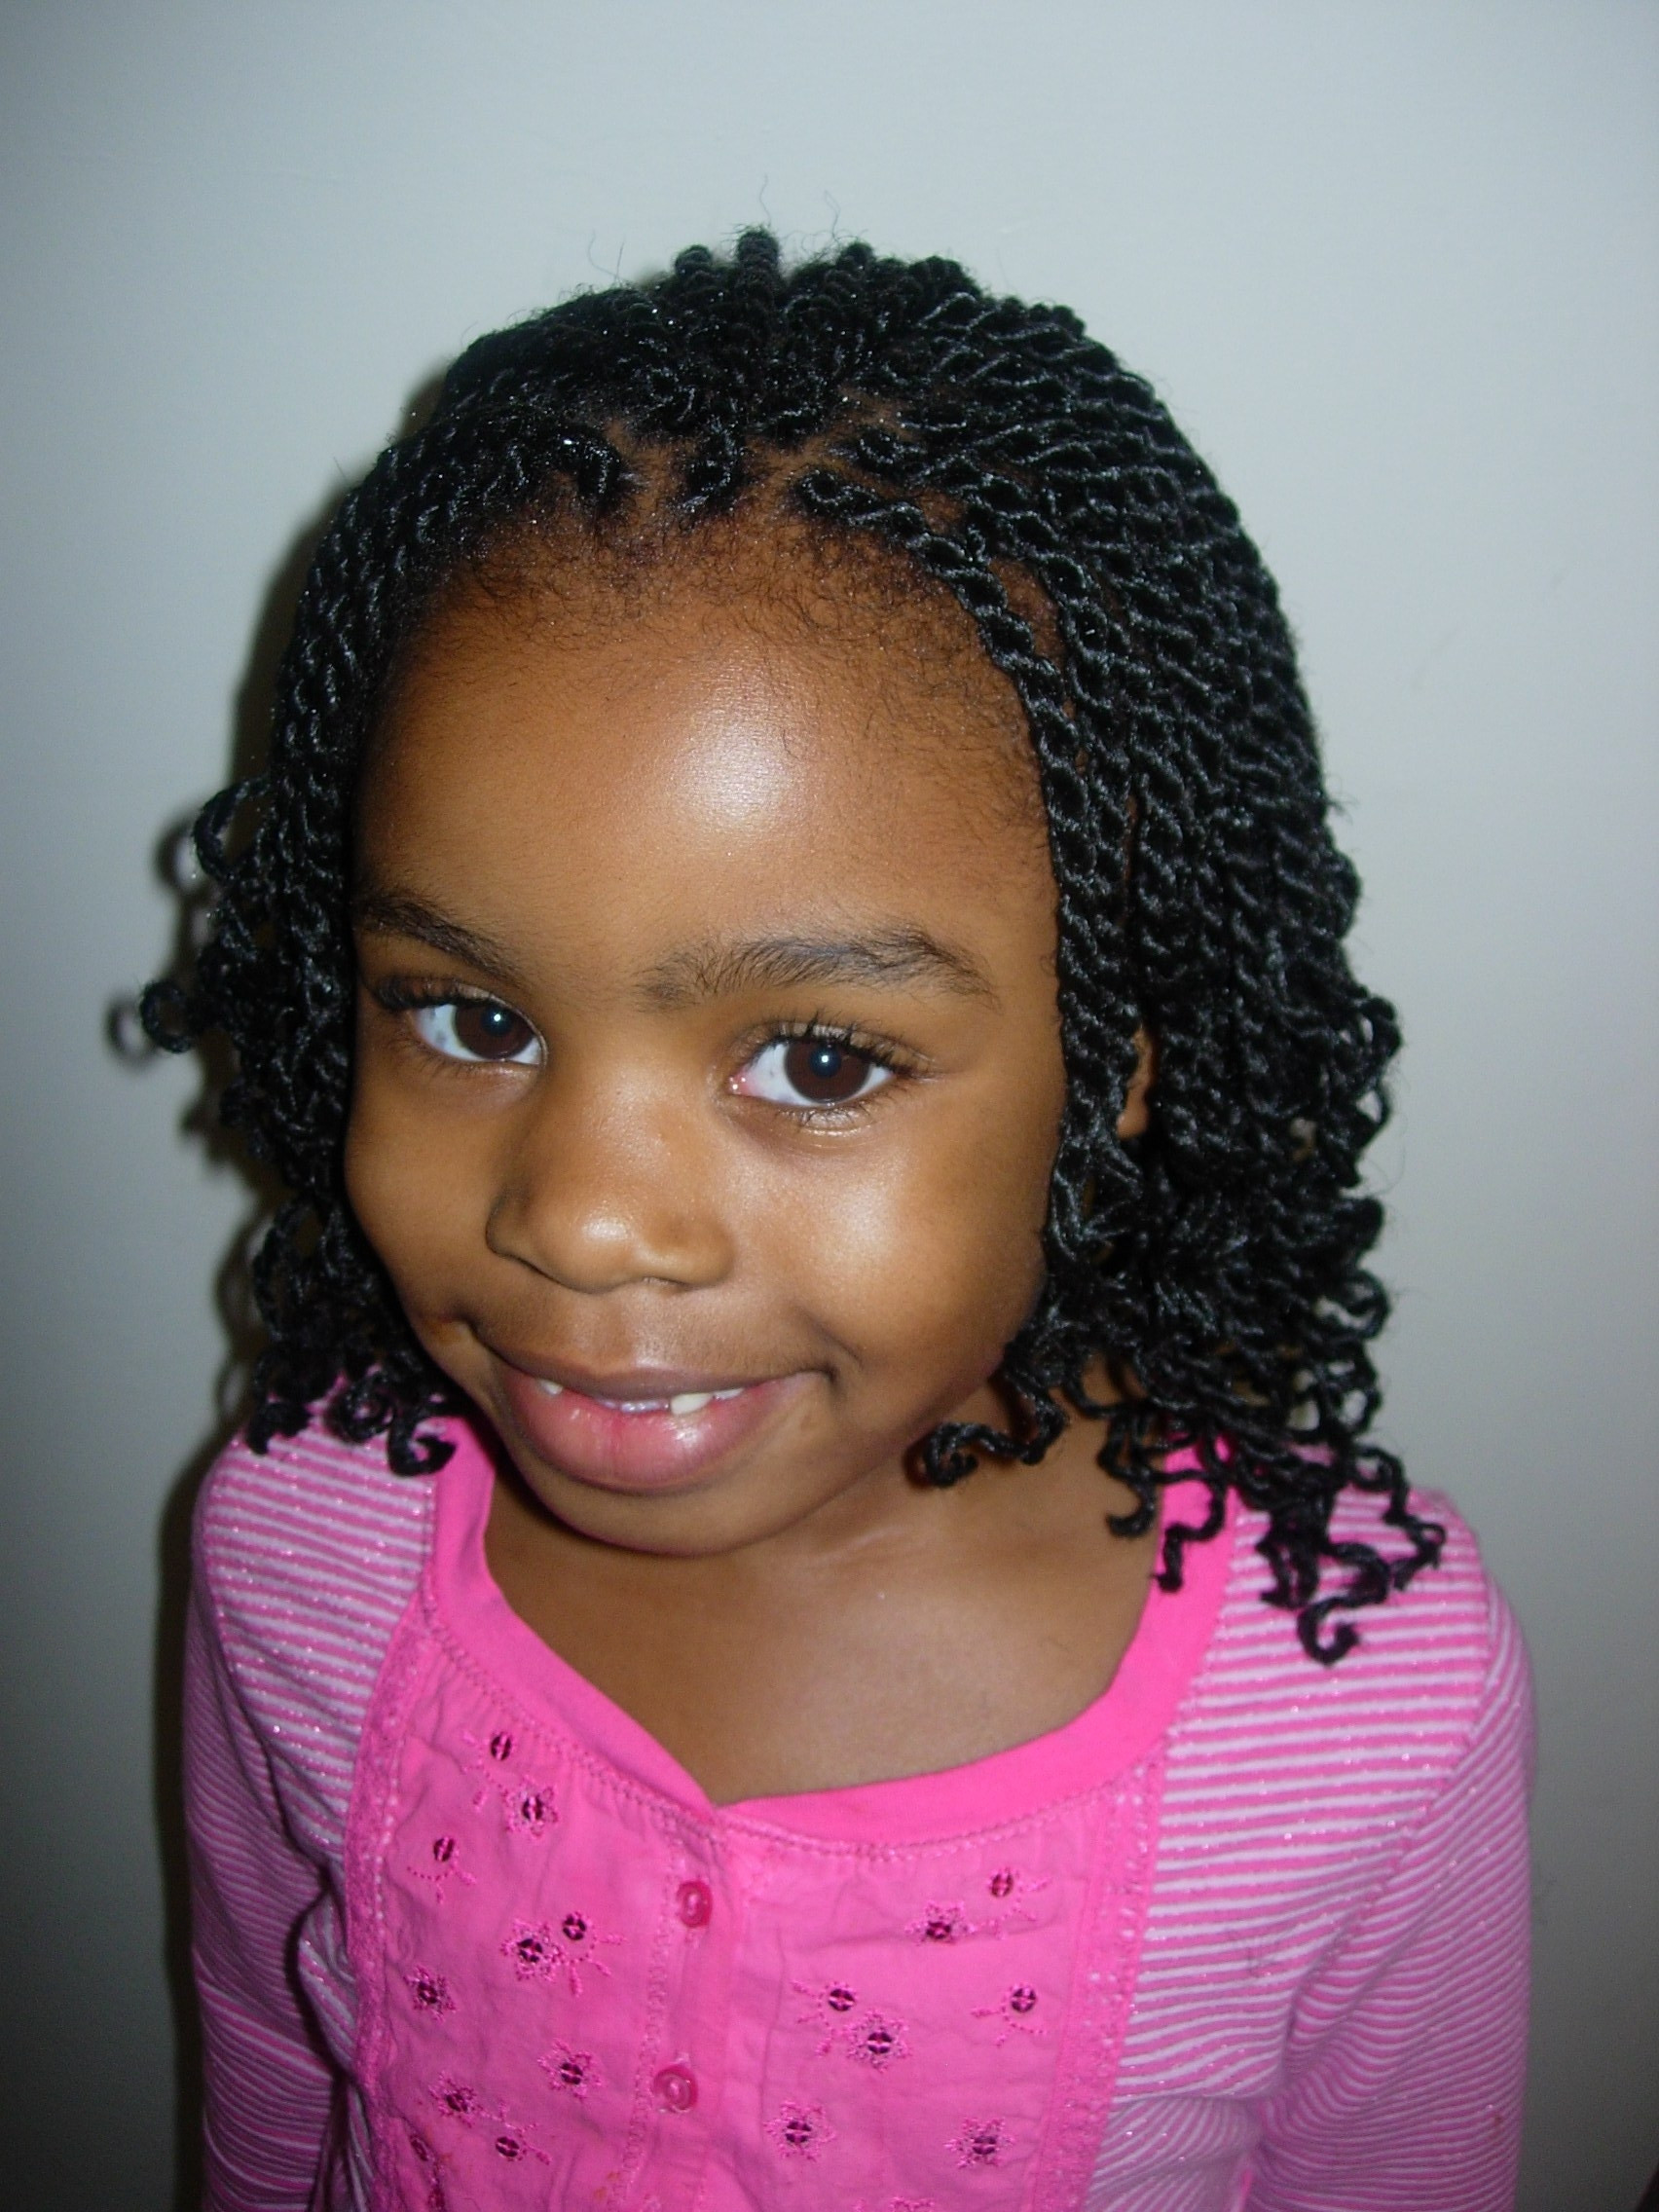 Twisted Hairstyles For Kids
 KINKY TWIST